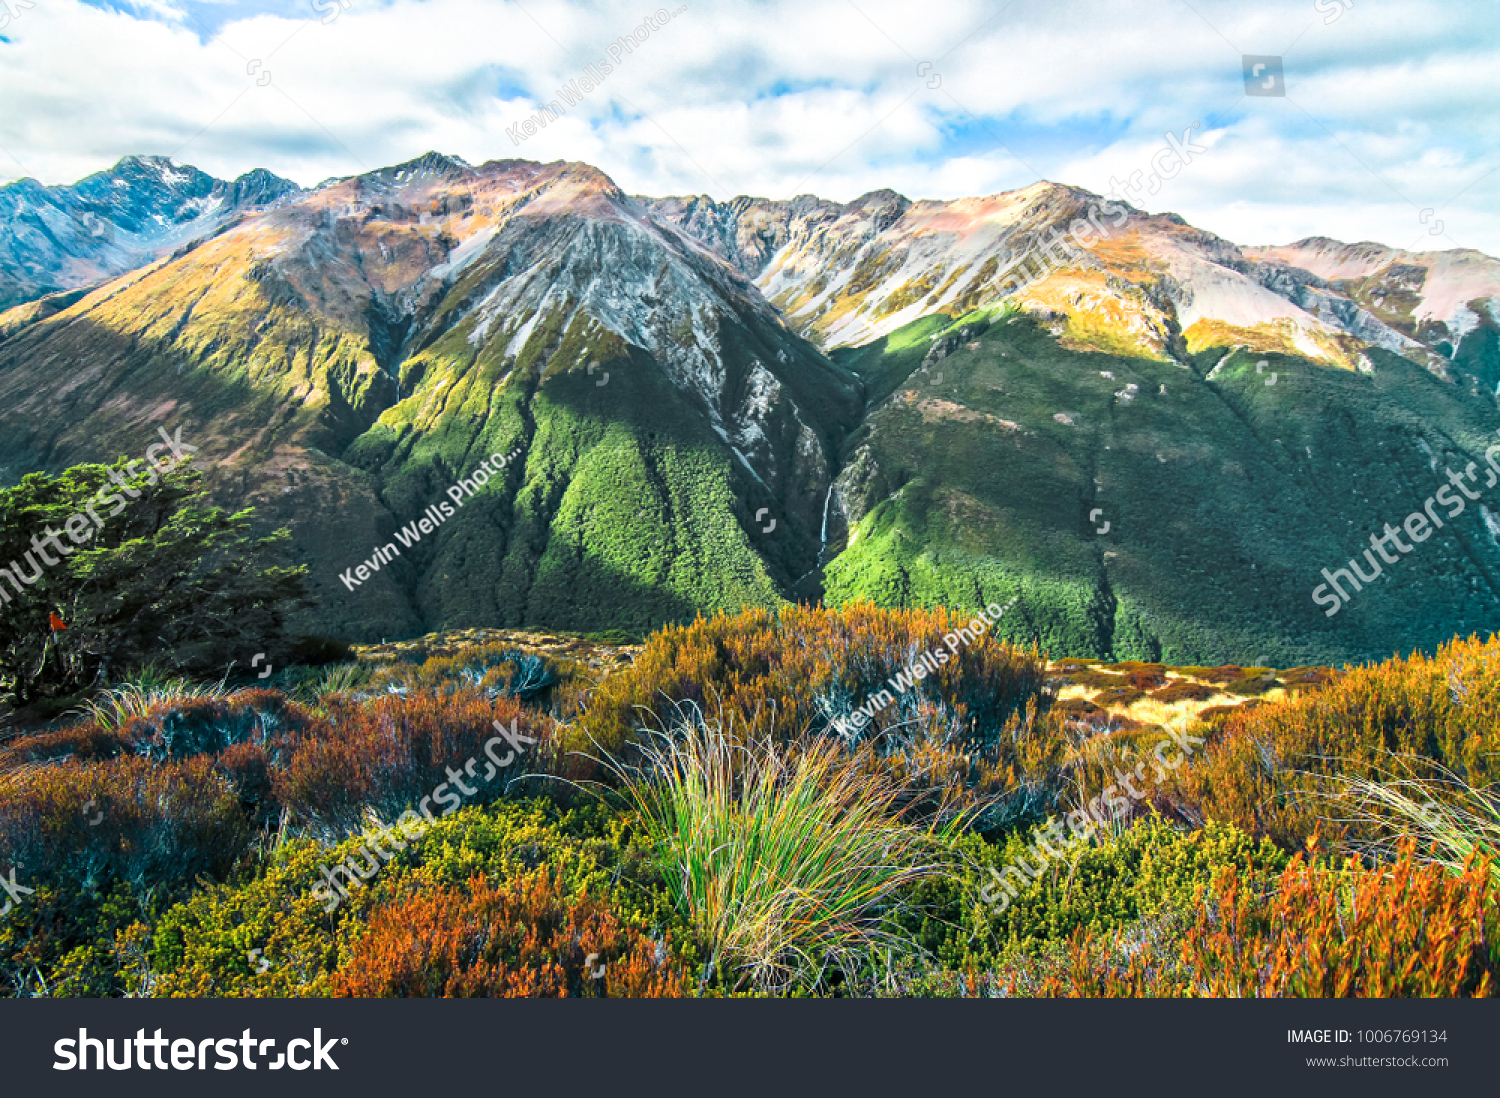 Looking south from the trail to Avalanche Peak in Arthur's Pass National Park, New Zealand. #1006769134